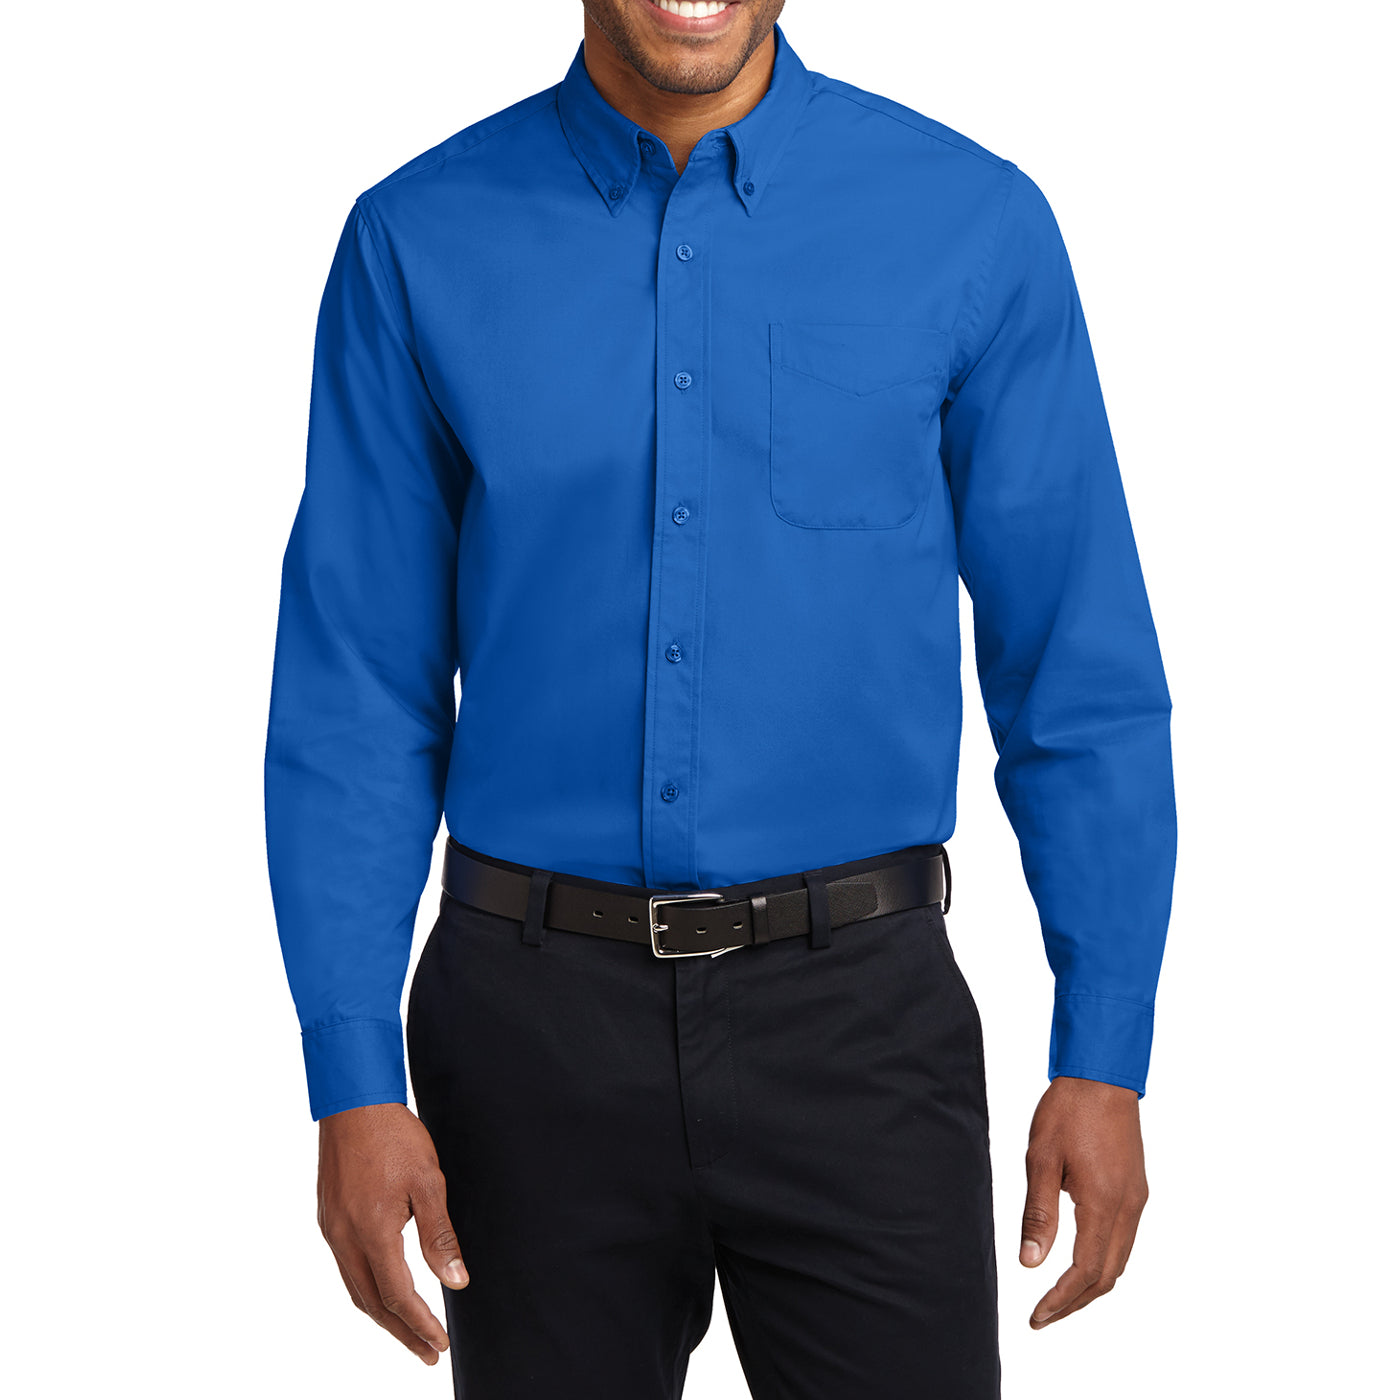 Men's Long Sleeve Easy Care Shirt - Strong Blue - Front